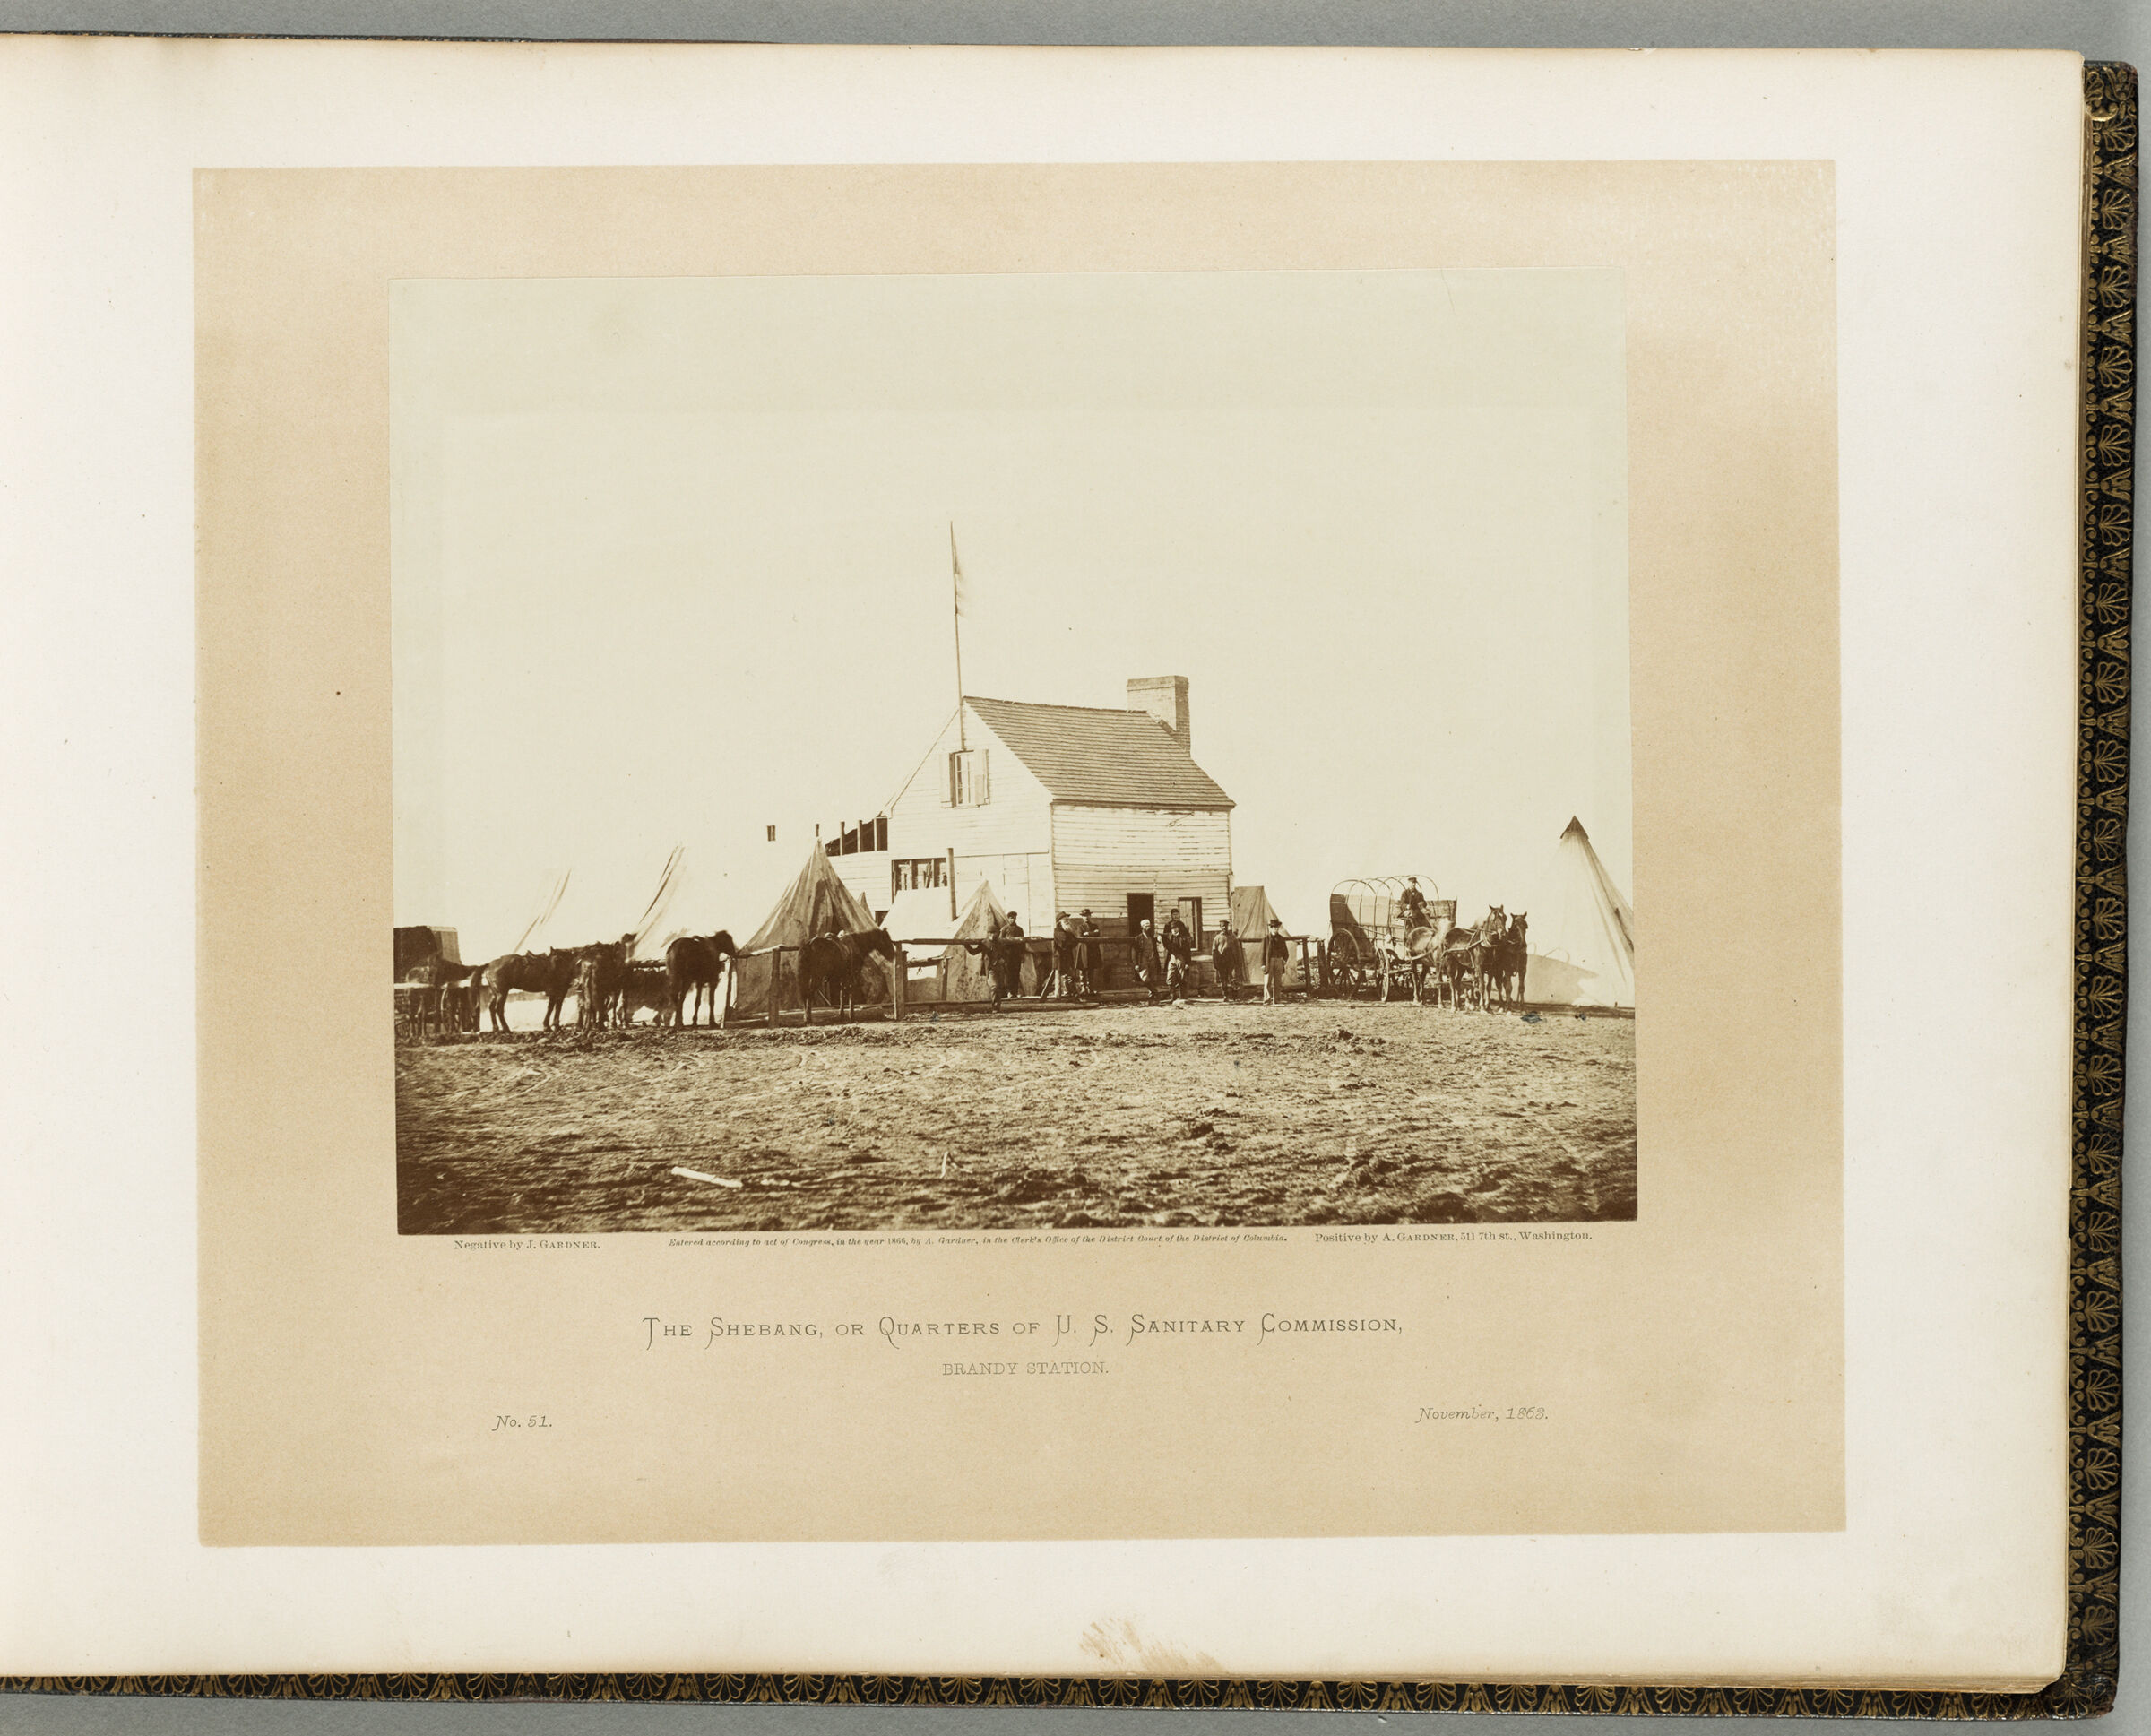 The Shebang, Or Quarters Of U.s. Sanitary Commission, Brandy Station